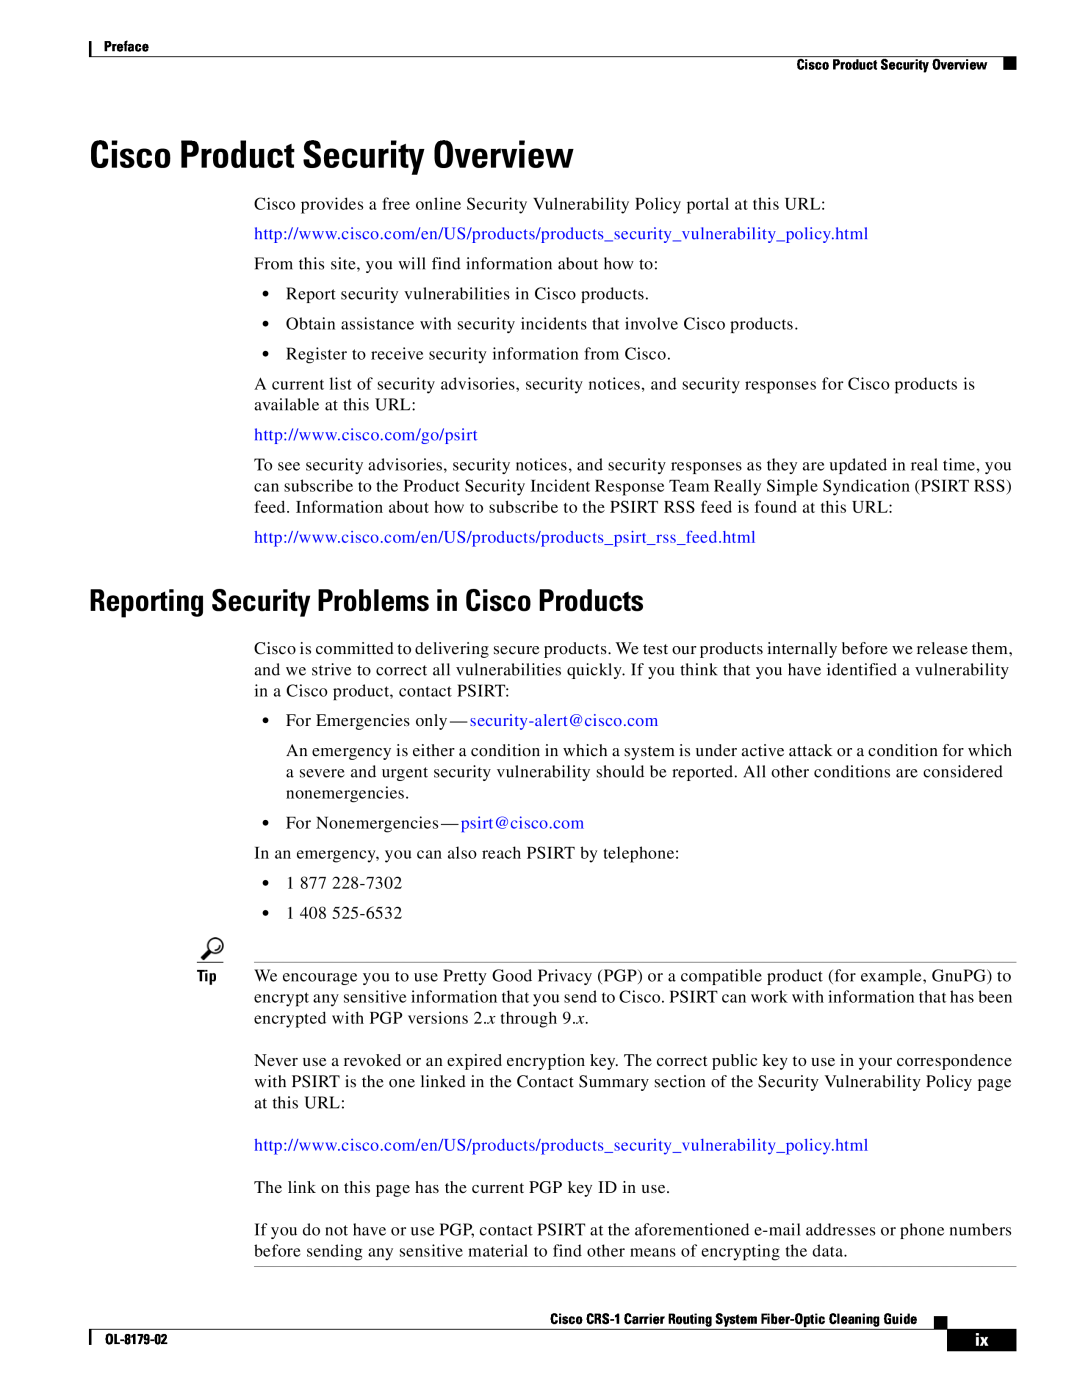 Cisco Systems CRS-1 manual Cisco Product Security Overview, Reporting Security Problems in Cisco Products 